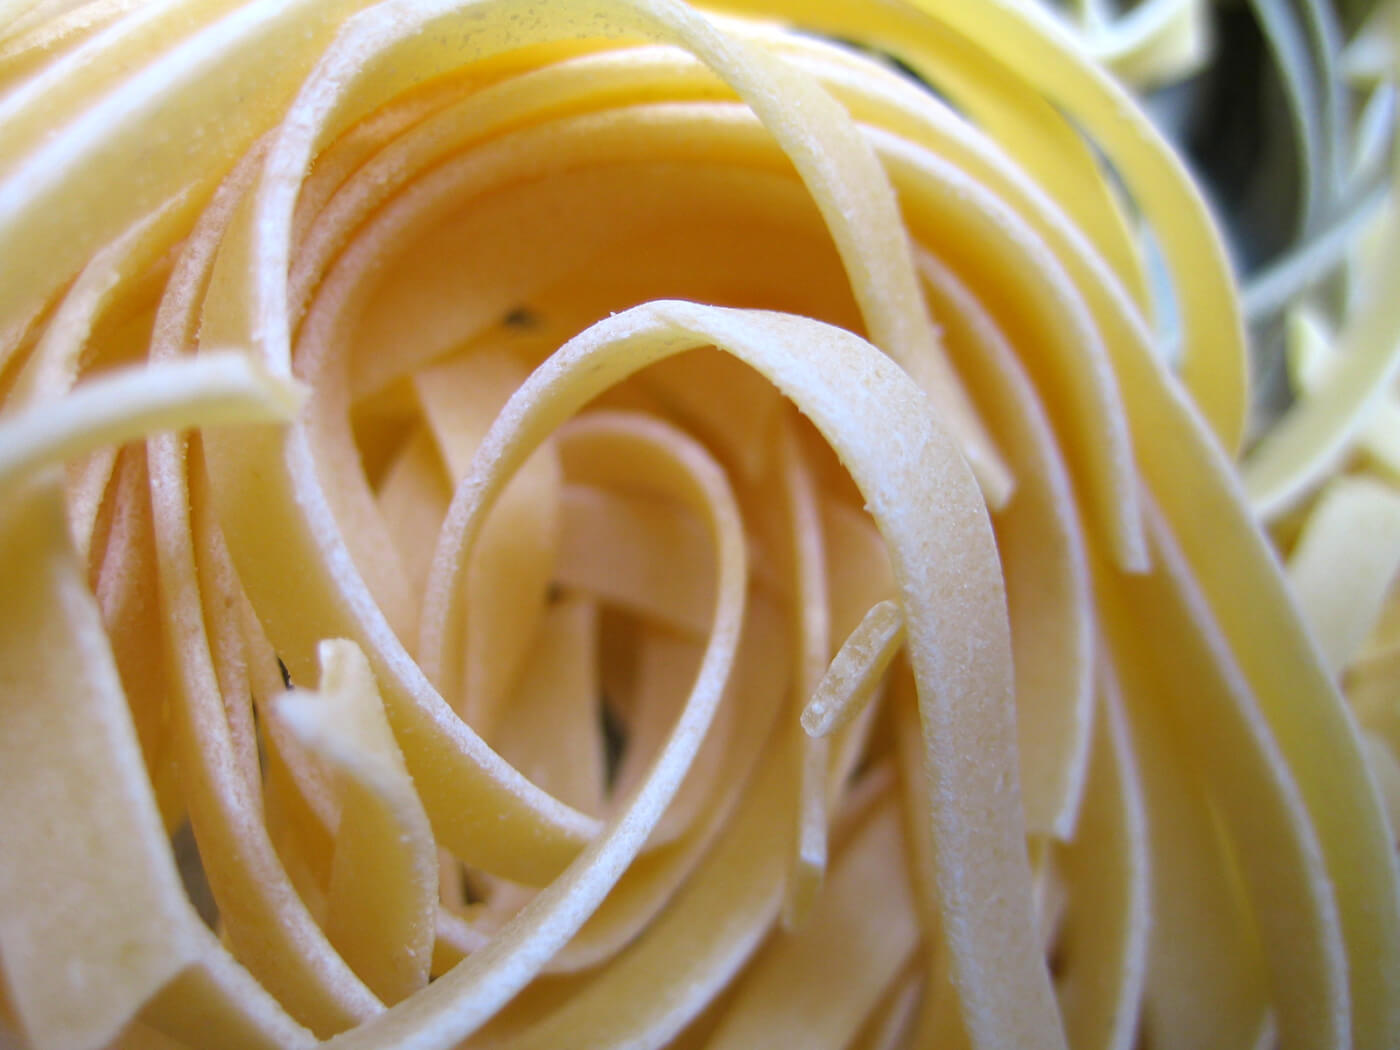 Study shows how pasta consumption is linked to reduced likelihood of general, abdominal obesity